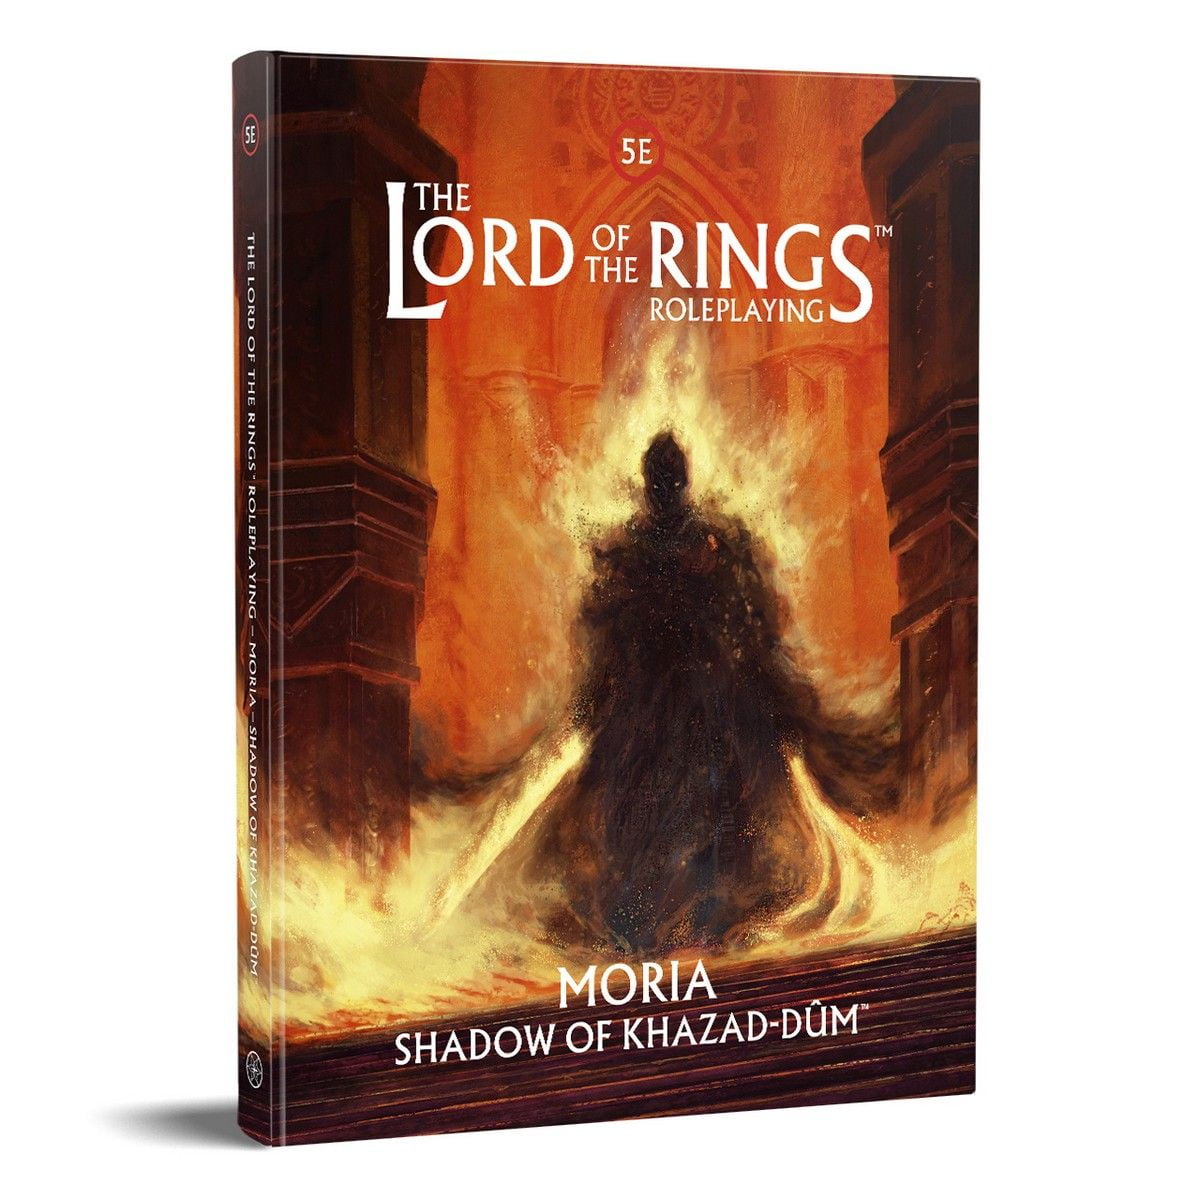 The Lord of the Rings Roleplaying 5E: Shadow of Khazad-dum